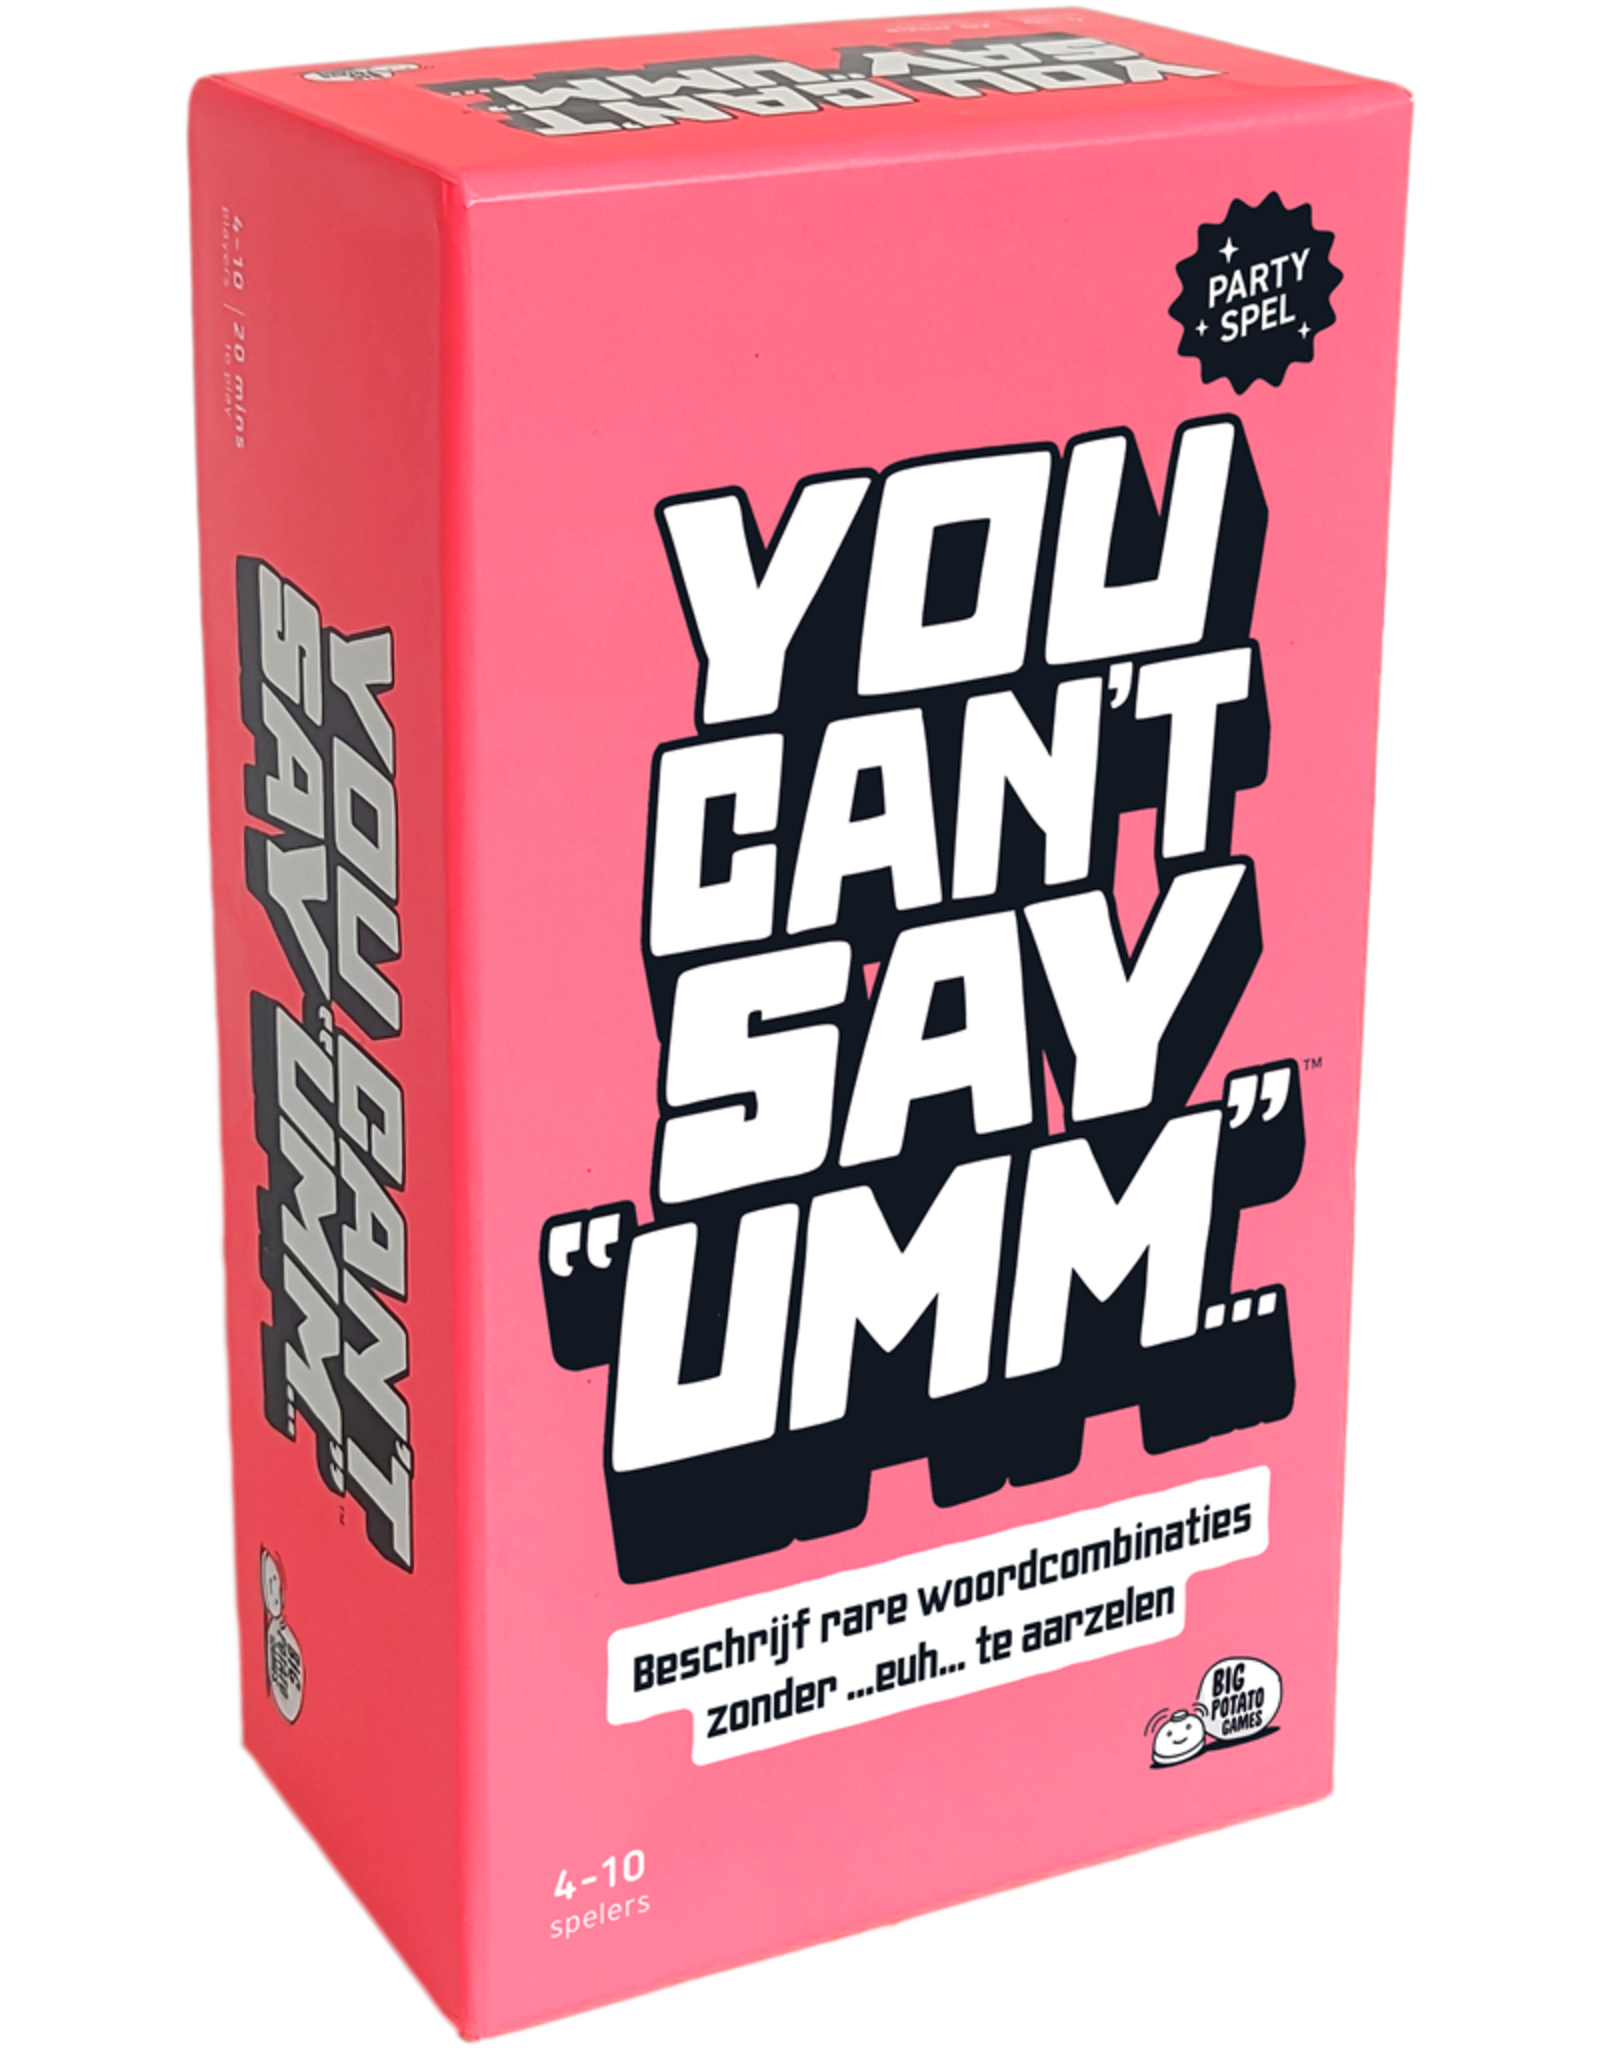 You Can’t Say “Umm…”